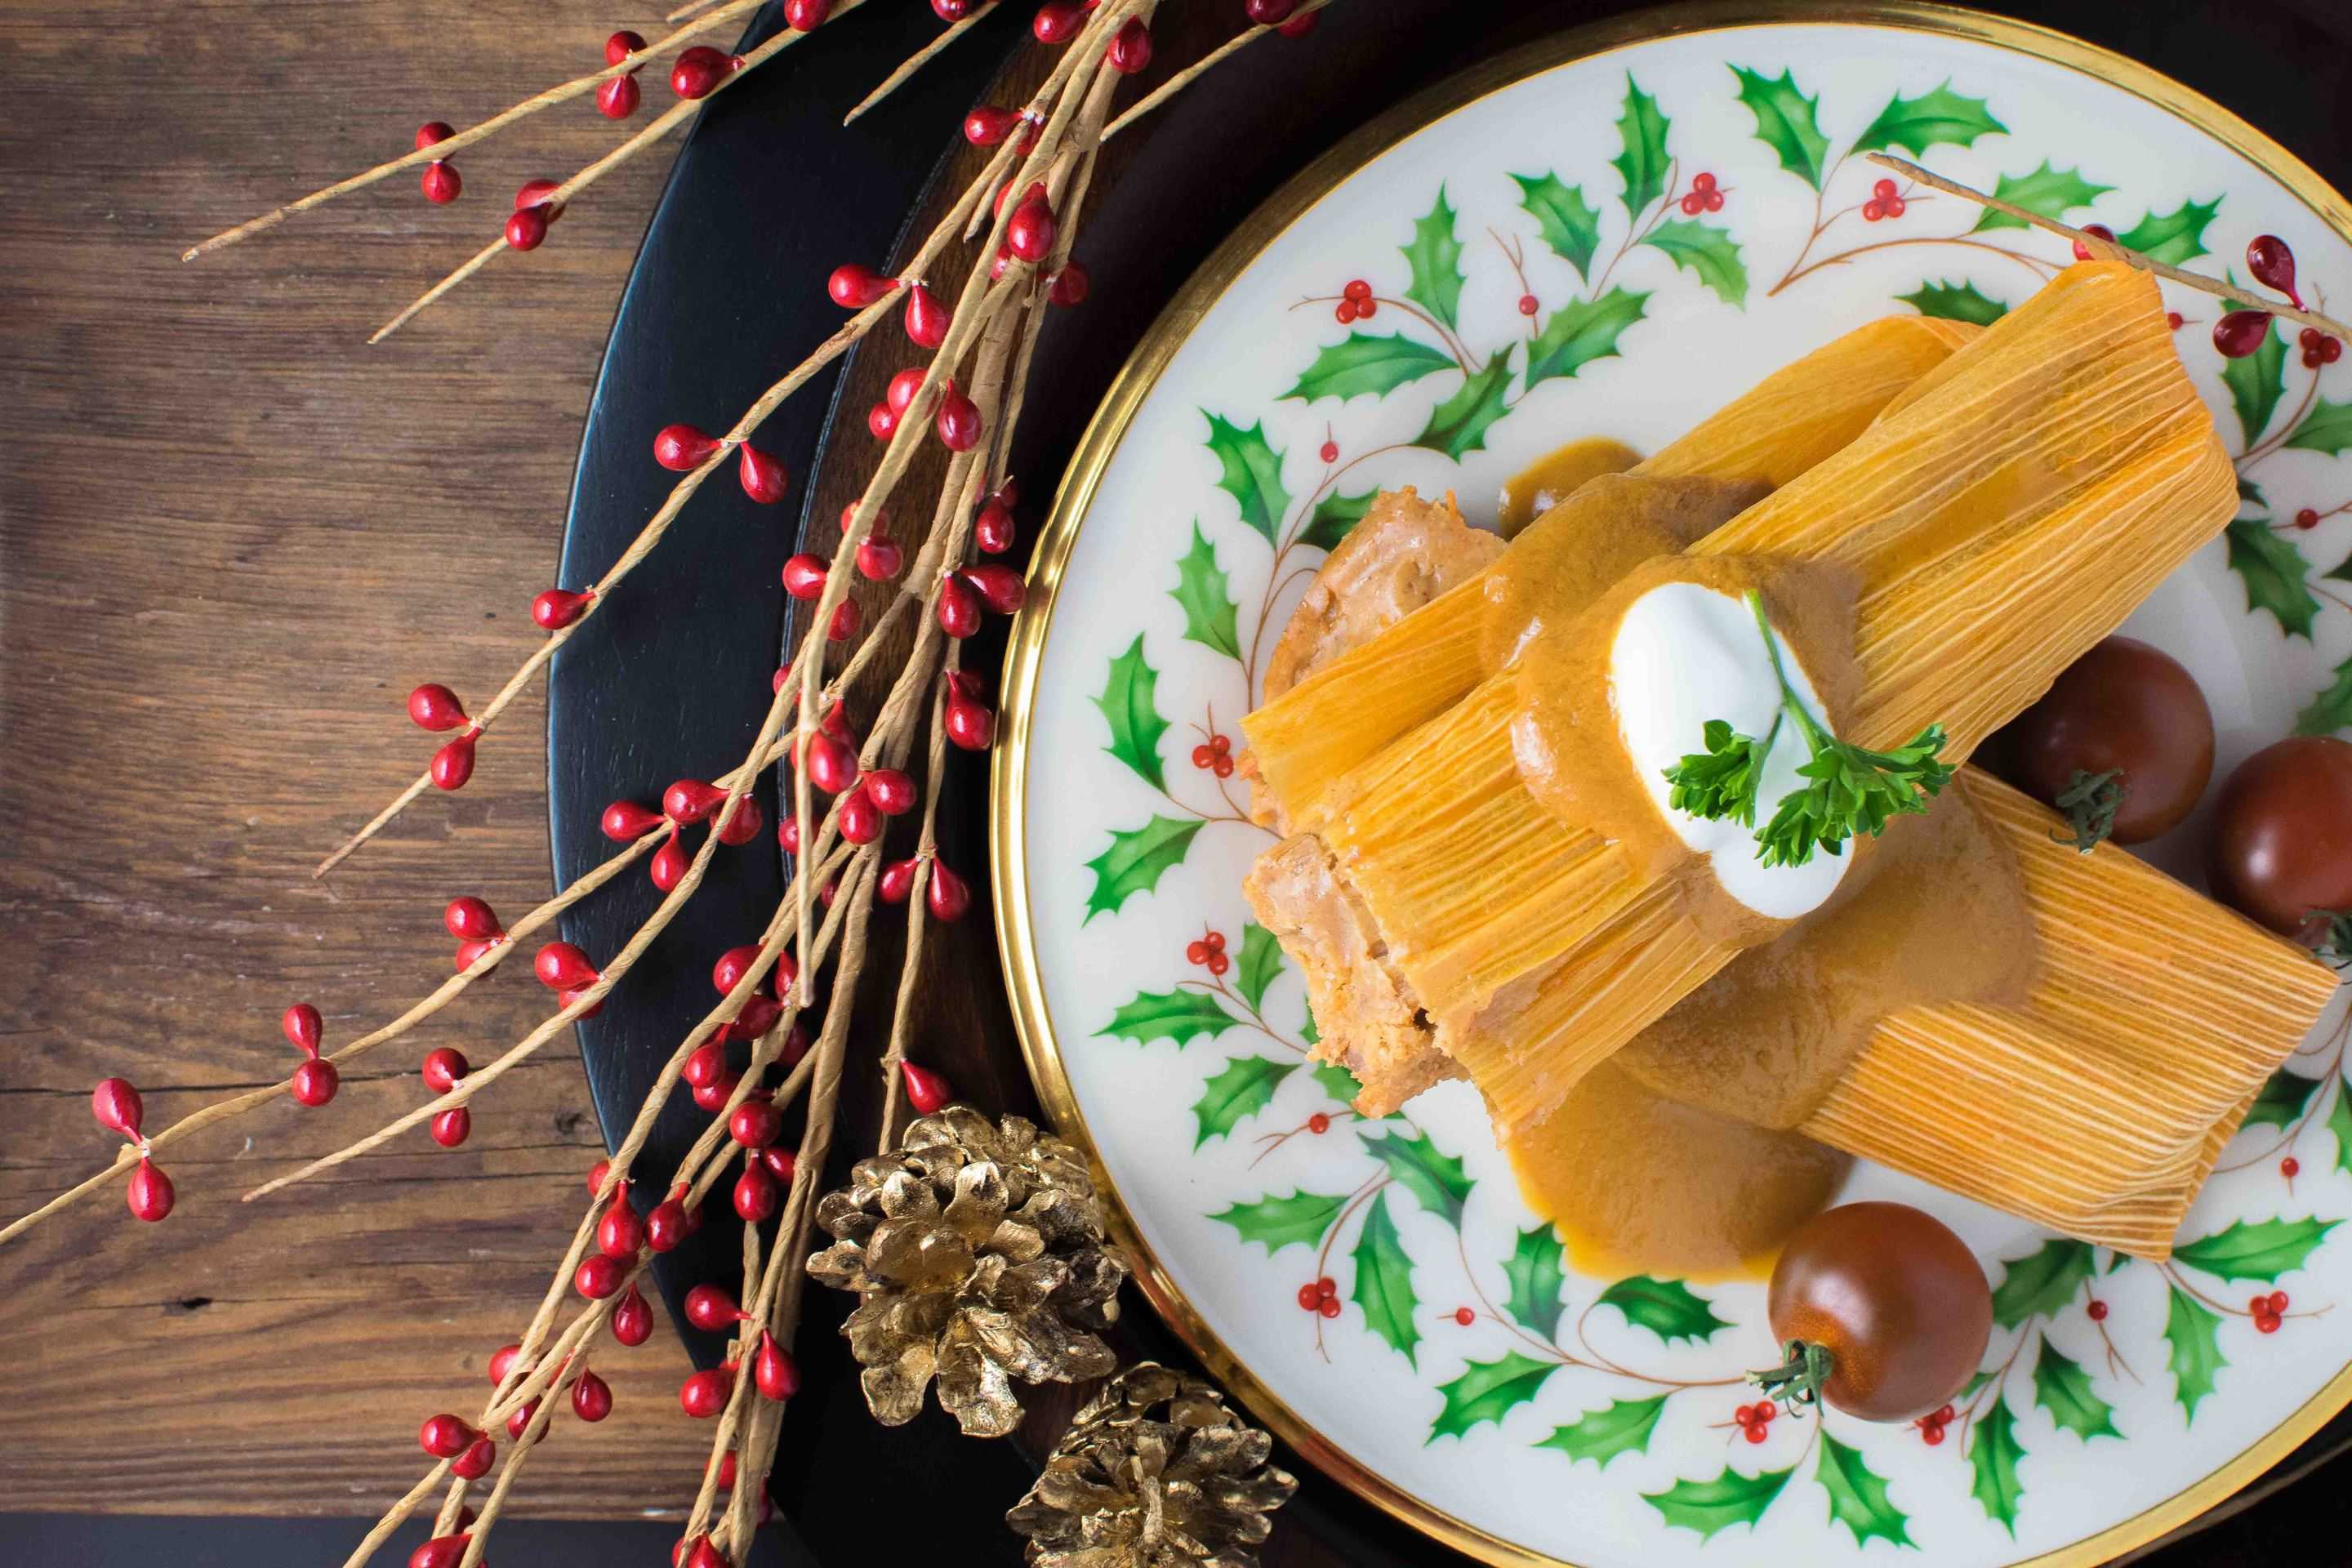 Hot Tamales on Decorative Holiday Plate - Photo by Nancy Farrar